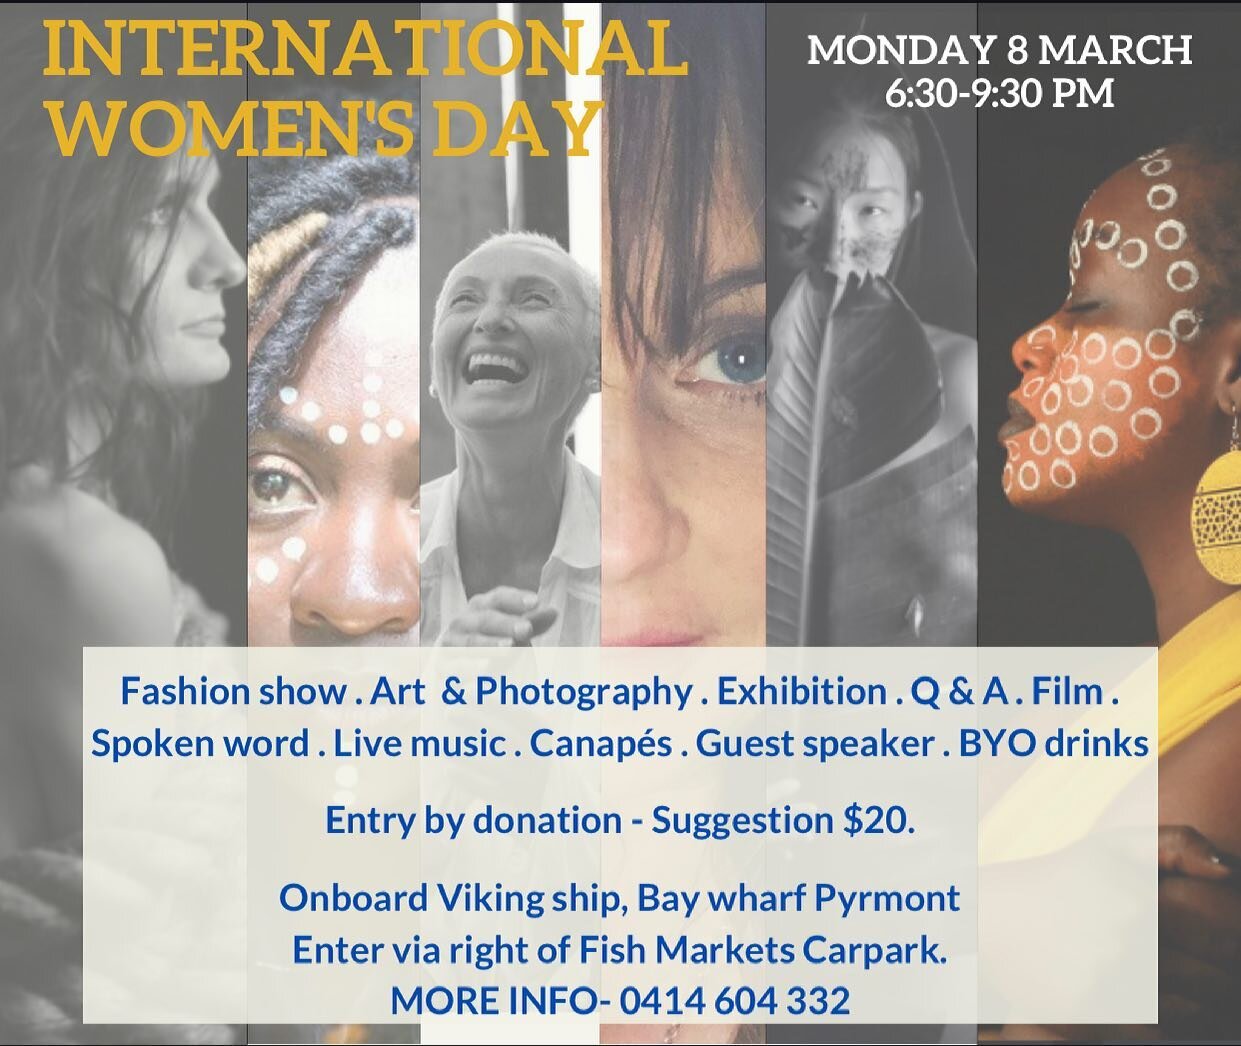 Ethical Law&rsquo;s Founder &amp; Principal Lawyer, Kiri Libbesson, is proud to be involved in this International Women&rsquo;s Day event on Monday! 

It&rsquo;s in a unique location and will showcase some incredible women, have entertainment, there 